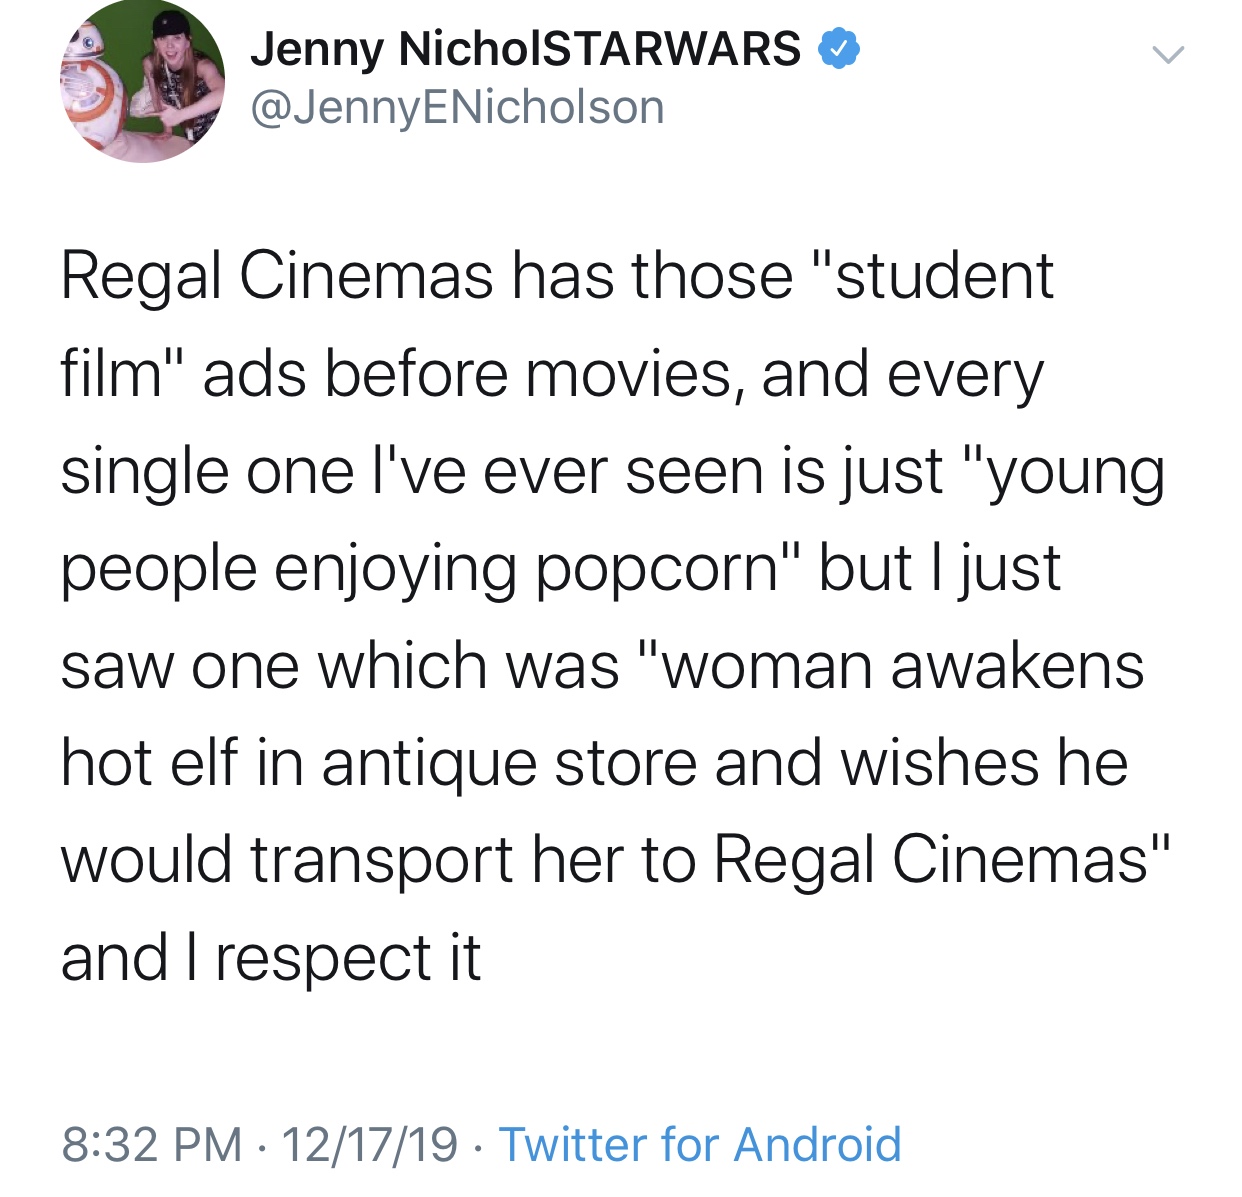 NCT - Jenny NicholSTARWARS Regal Cinemas has those "student film" ads before movies, and every single one I've ever seen is just "young people enjoying popcorn" but I just saw one which was "woman awakens hot elf in antique store and wishes he would trans